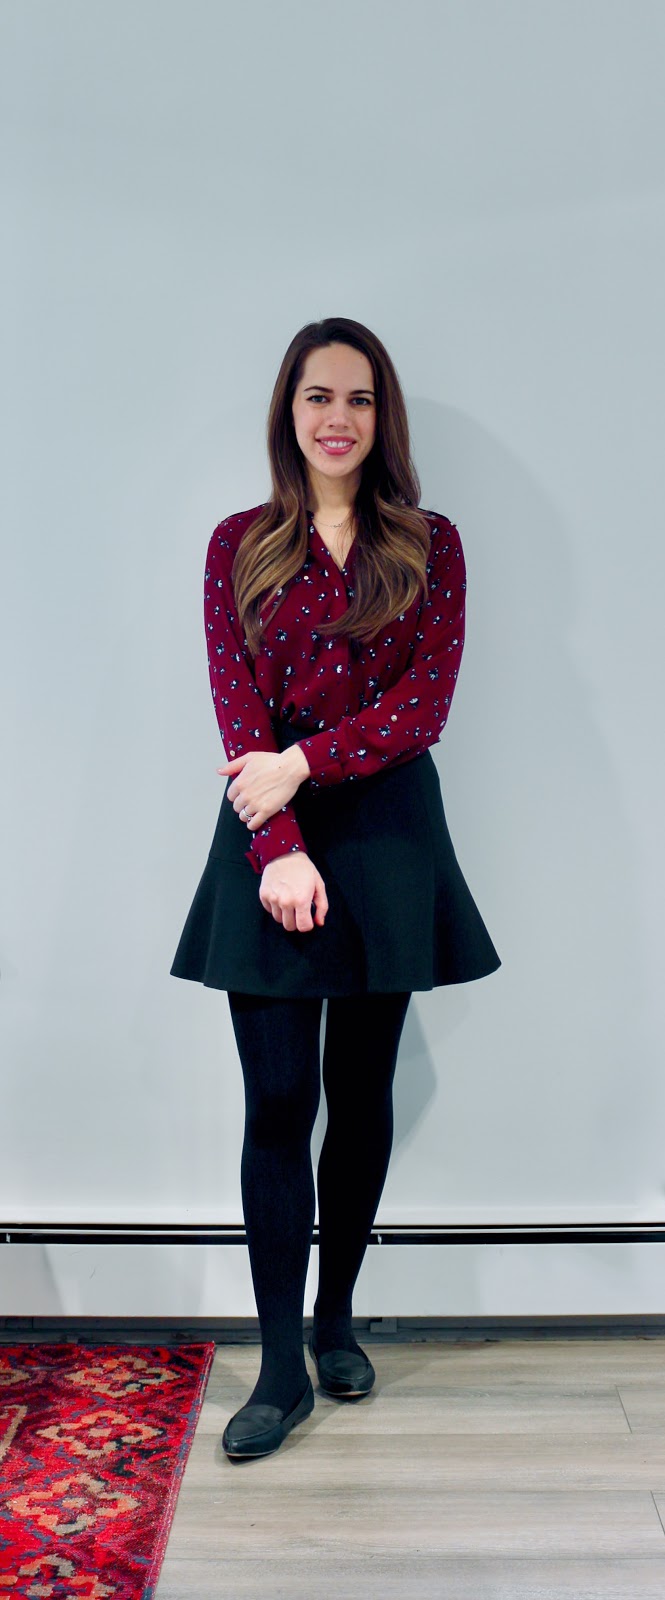 Jules in Flats - Burgundy Floral Blouse with Fit and Flare Mini Skirt (Business Casual Winter Workwear on a Budget)